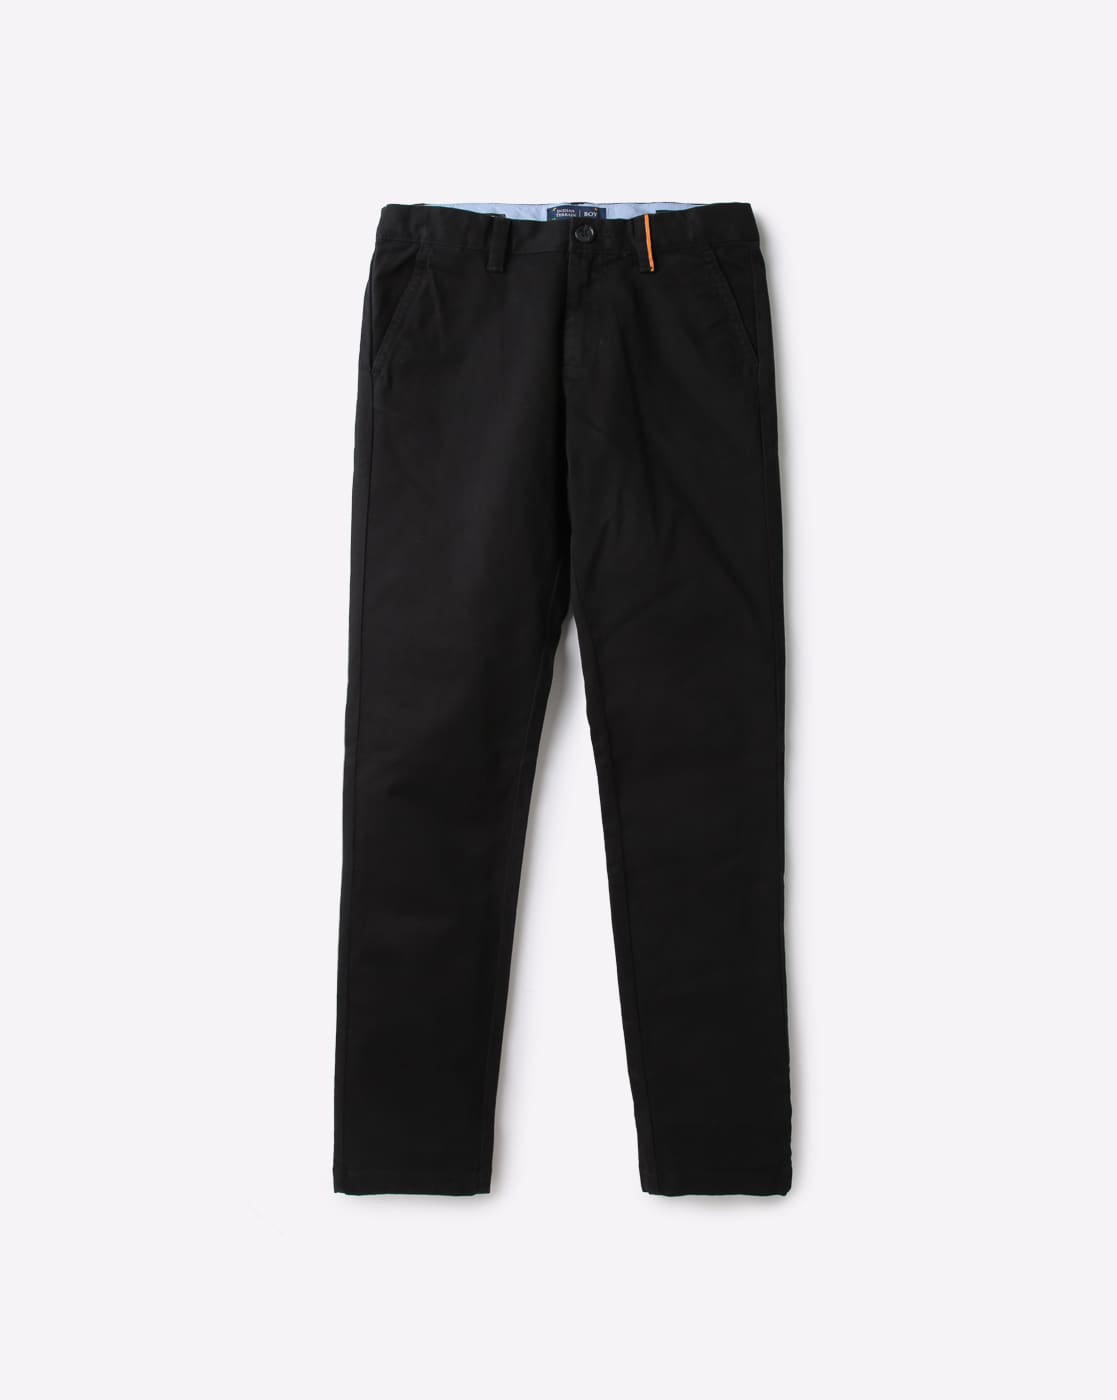 Buy GINI  JONY Black Solid Cotton Reguler Fit Boys Trousers  Shoppers Stop